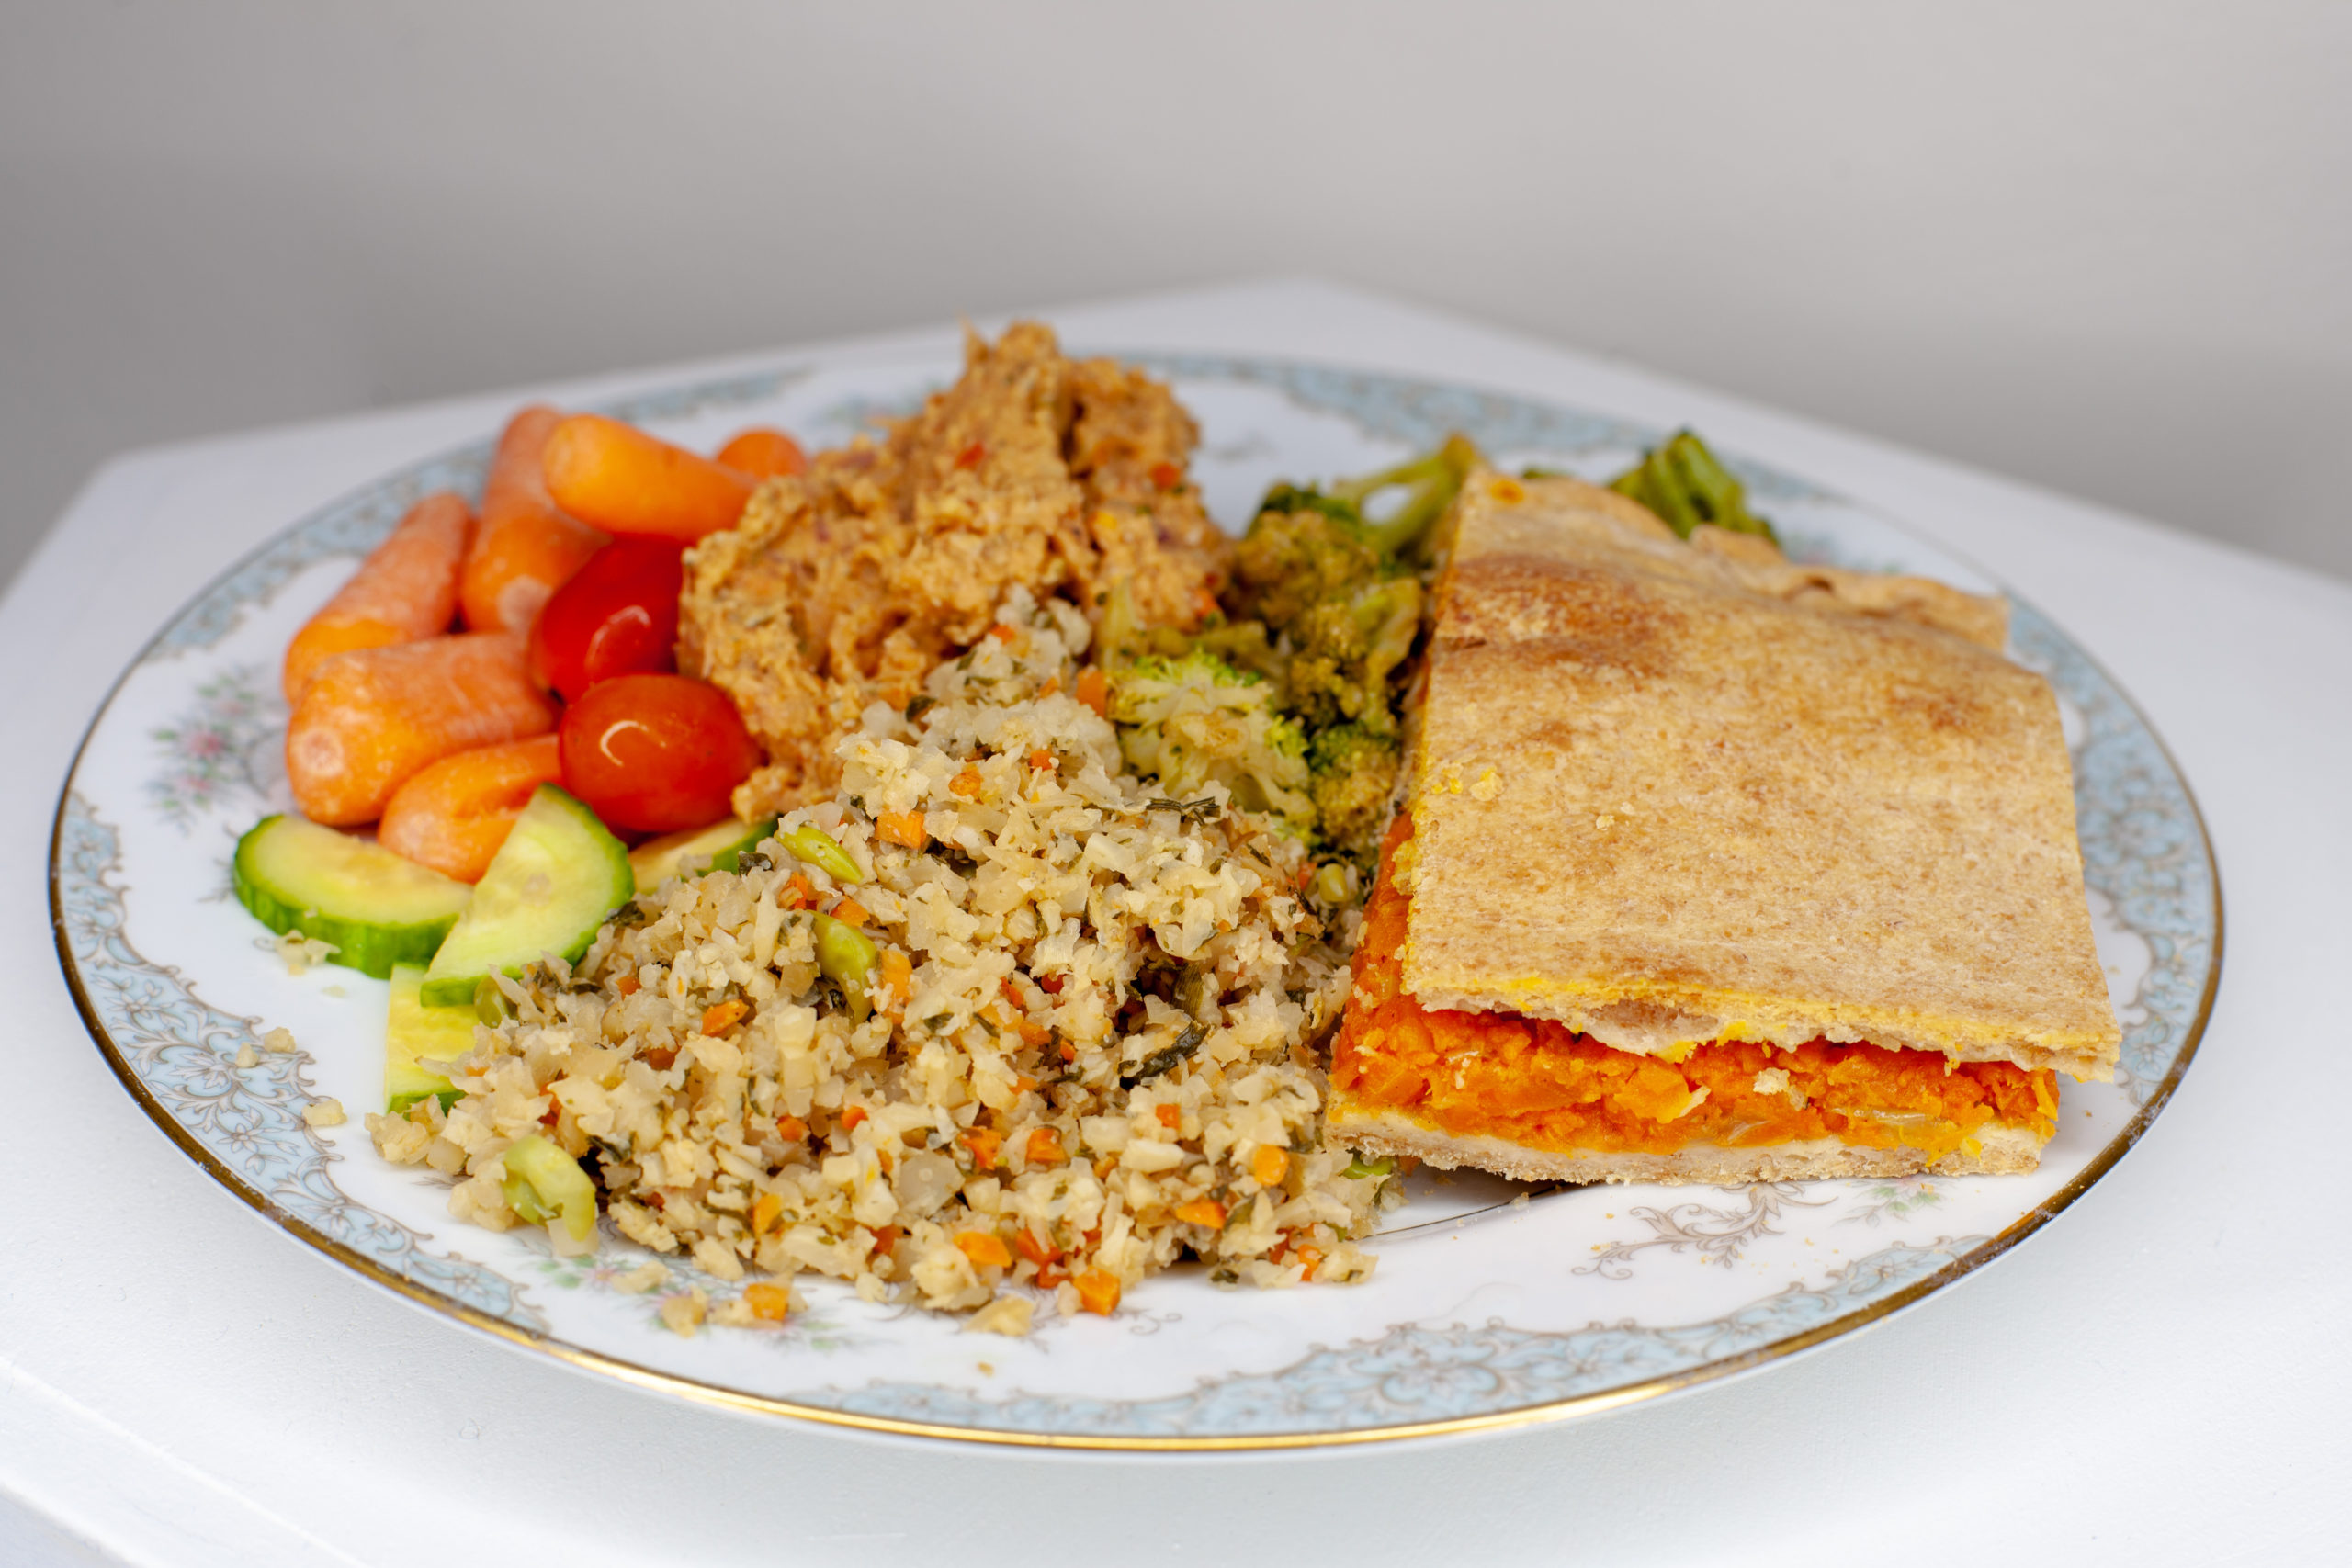 A piece of savoury carrot pie served with various foods, cauliflower fried rice, broccoli stir fry, fresh baby carrots and cherry tomatoes with bean pate dip